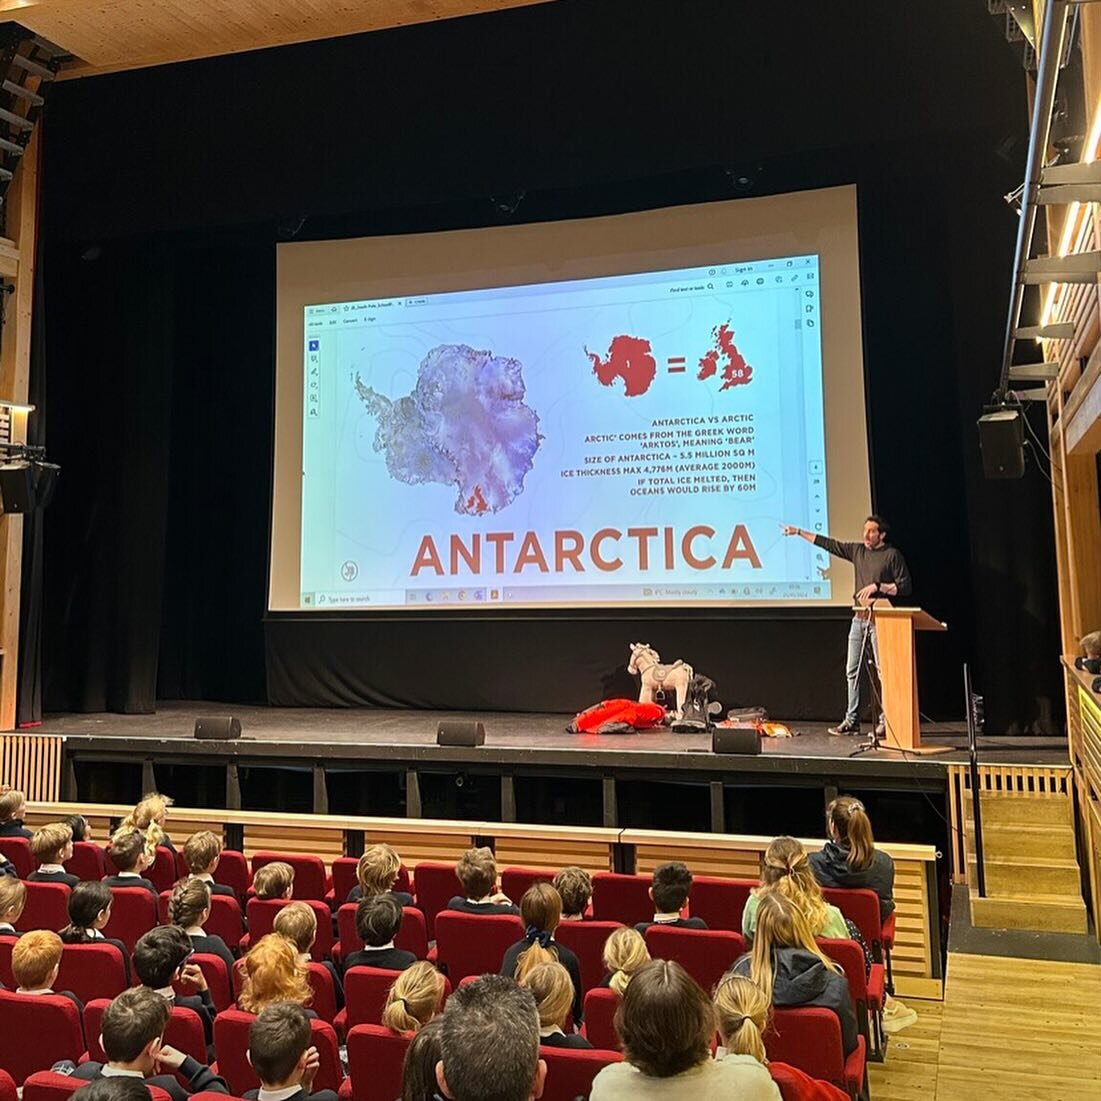 Thank you for inviting me back @hurst_college to share my story and expedition in Antarctica. Always special to see how the children react to some of the stats and photos of this frozen planet. Also congratulations to all those children who submitted